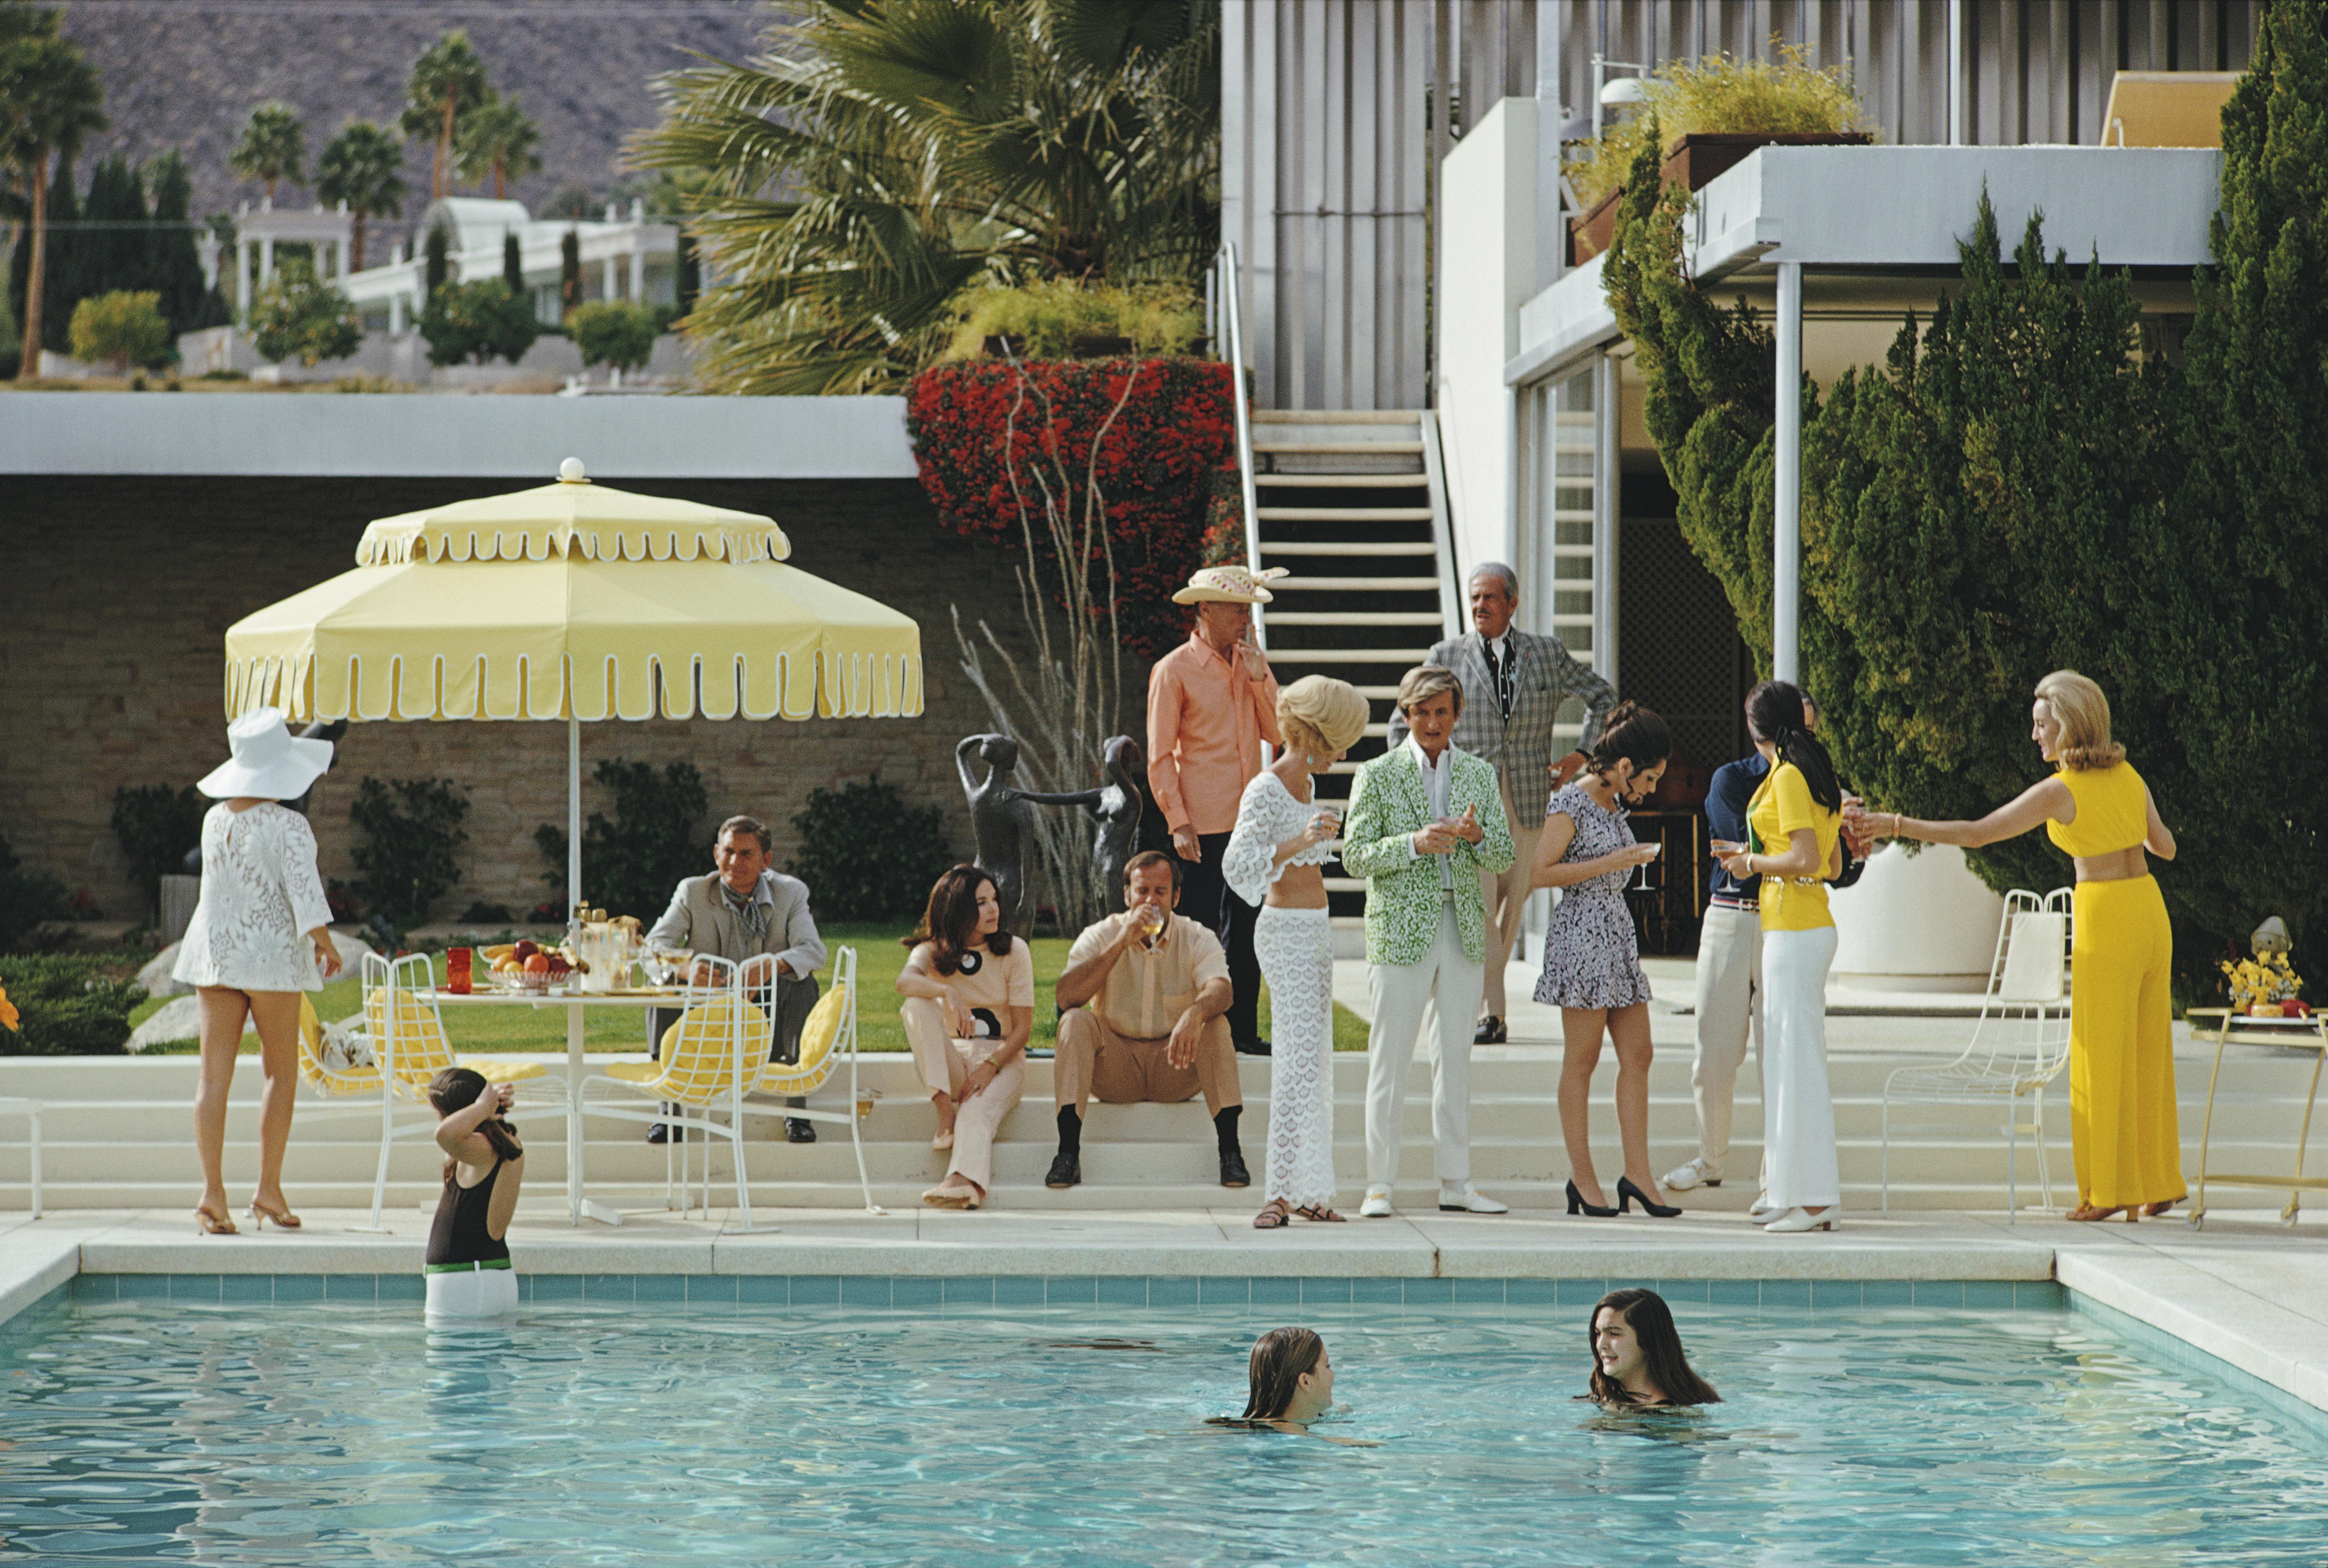 Slim Aarons
Poolside Party, (Kaufmann Desert House), 
1970. (printed later)
C print 
Estate stamped and numbered edition of 150 
with Certificate of authenticity

A poolside party at a desert house, designed by Richard Neutra for Edgar J. Kaufmann,